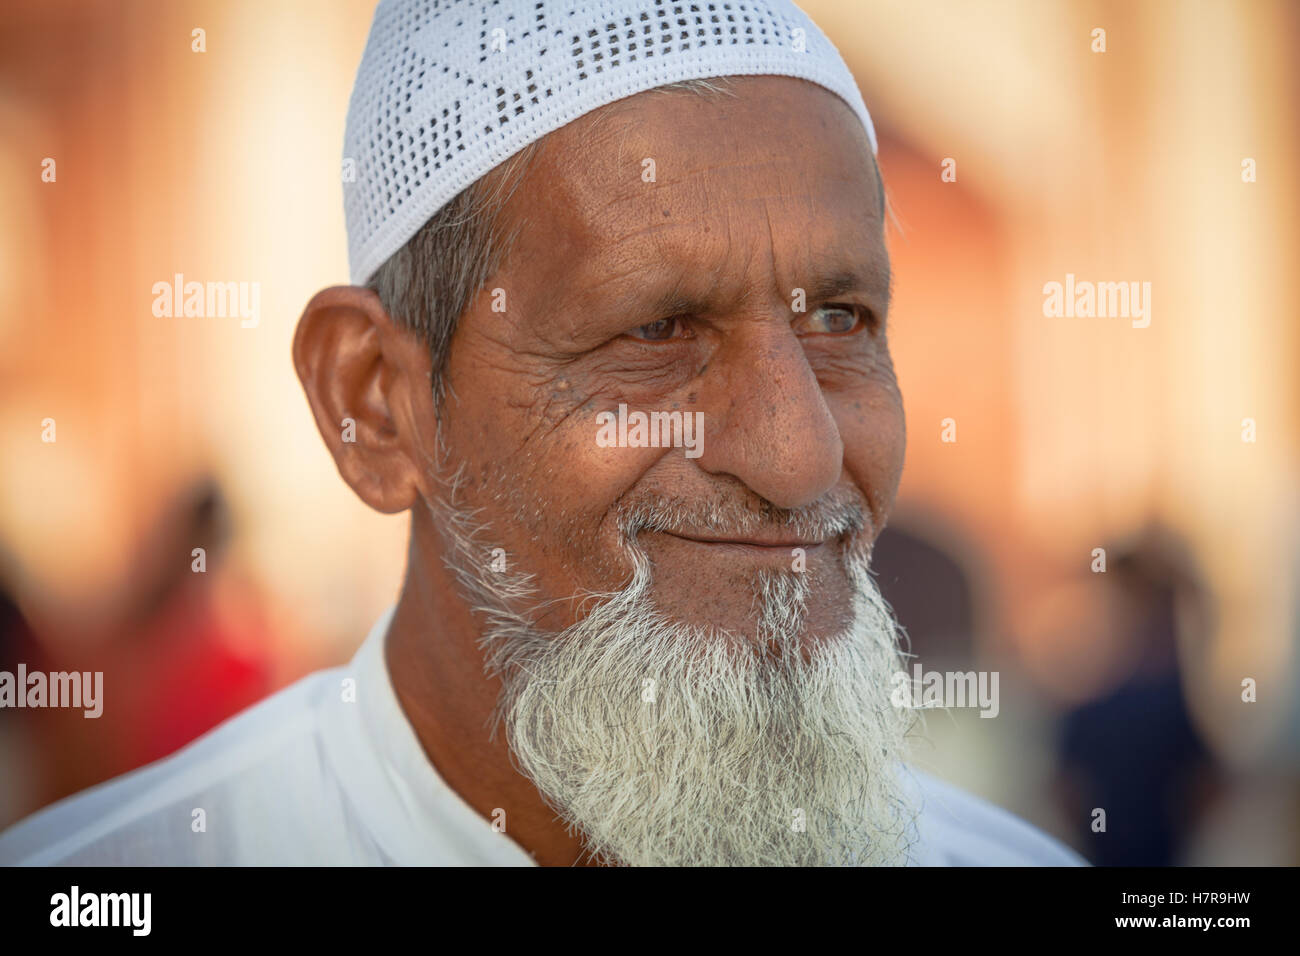 An older man wearing the traditional moslem kofi or topi hat, and beard, smiling and friendly-looking Stock Photo